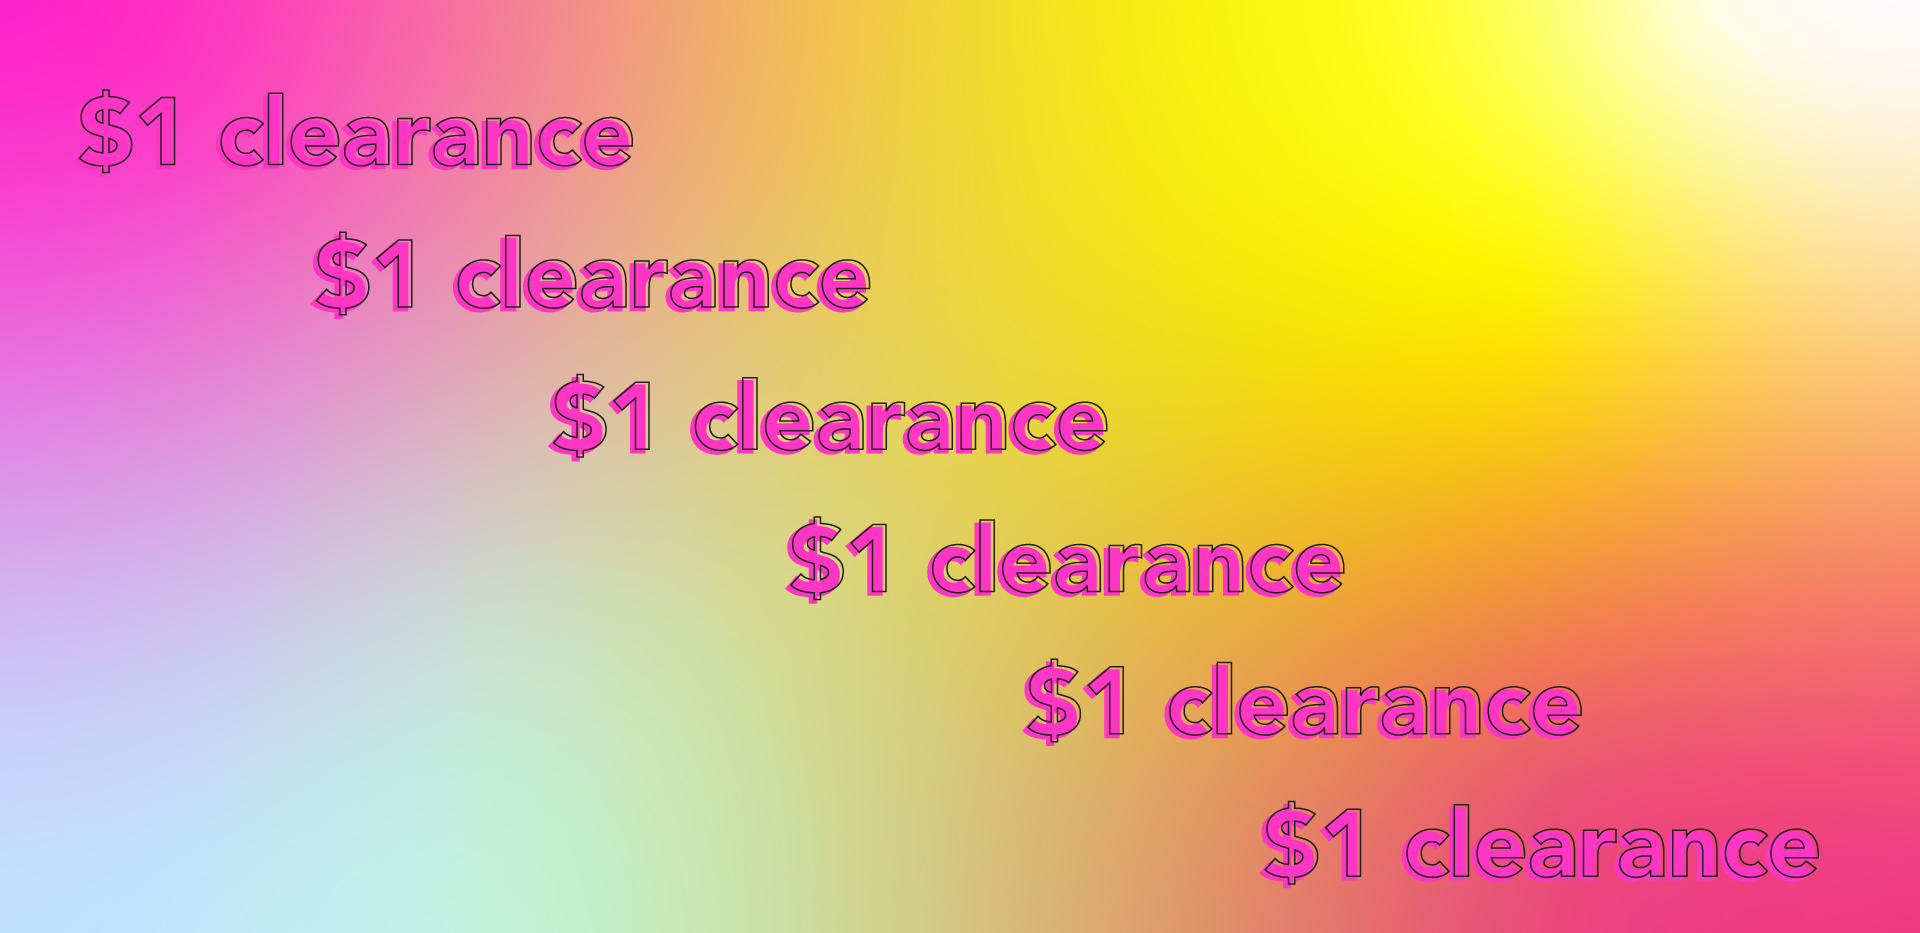 All clearance is $1 per item this weekend!